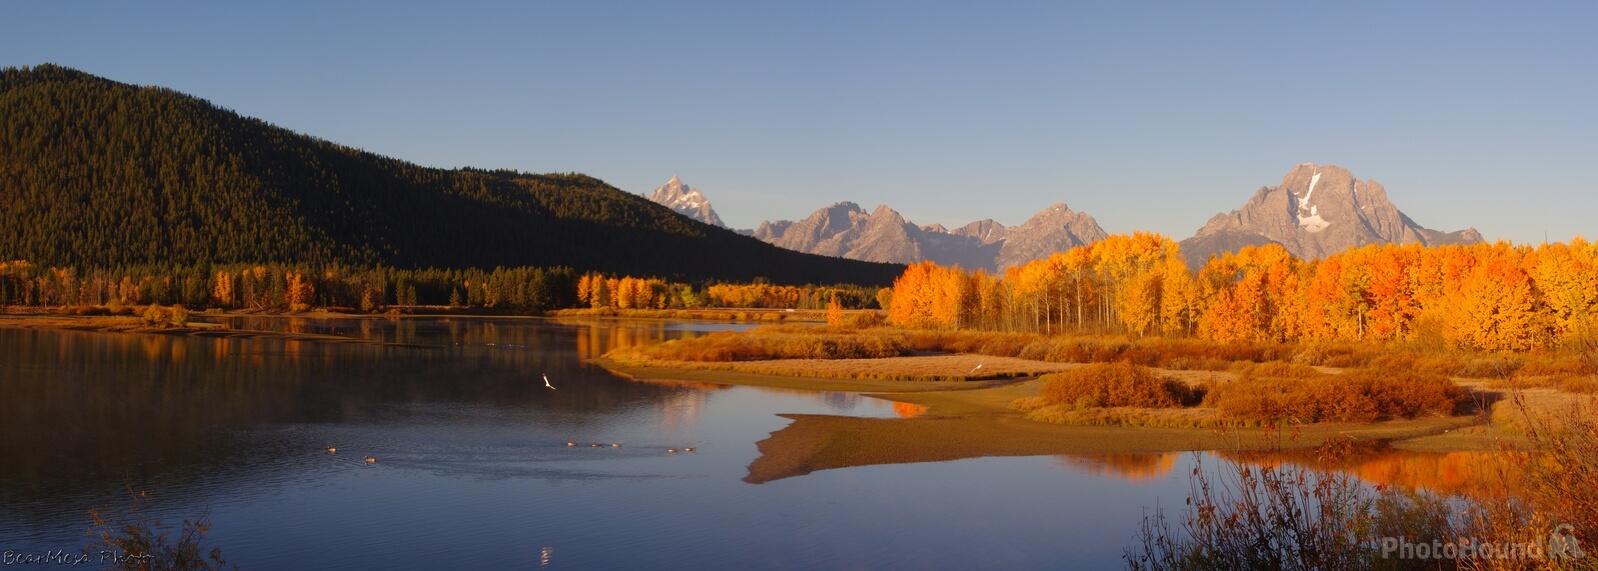 Image of Oxbow Bend by Ralph Troutman